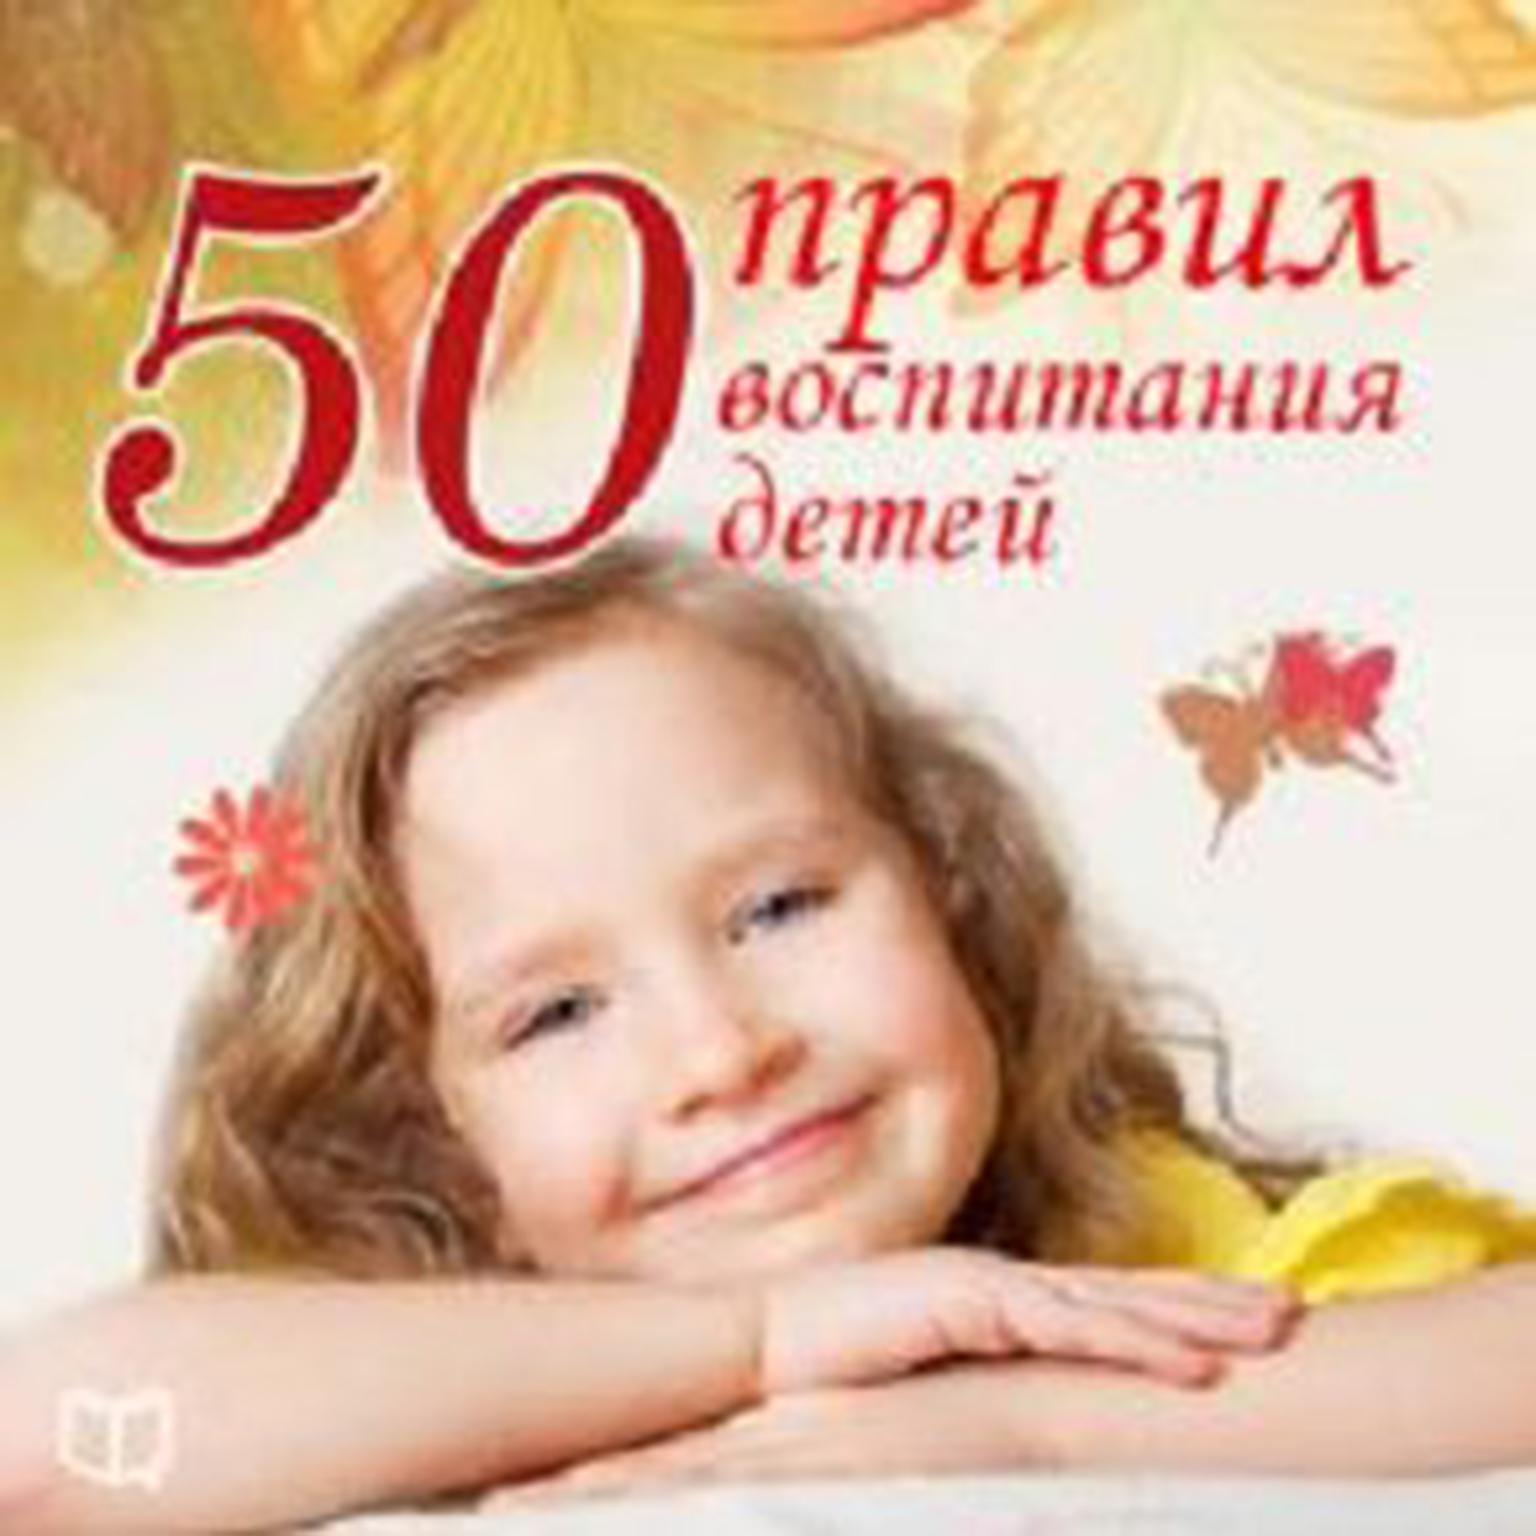 The 50 Main Rules of Parenting [Russian Edition] Audiobook, by Anna Morris